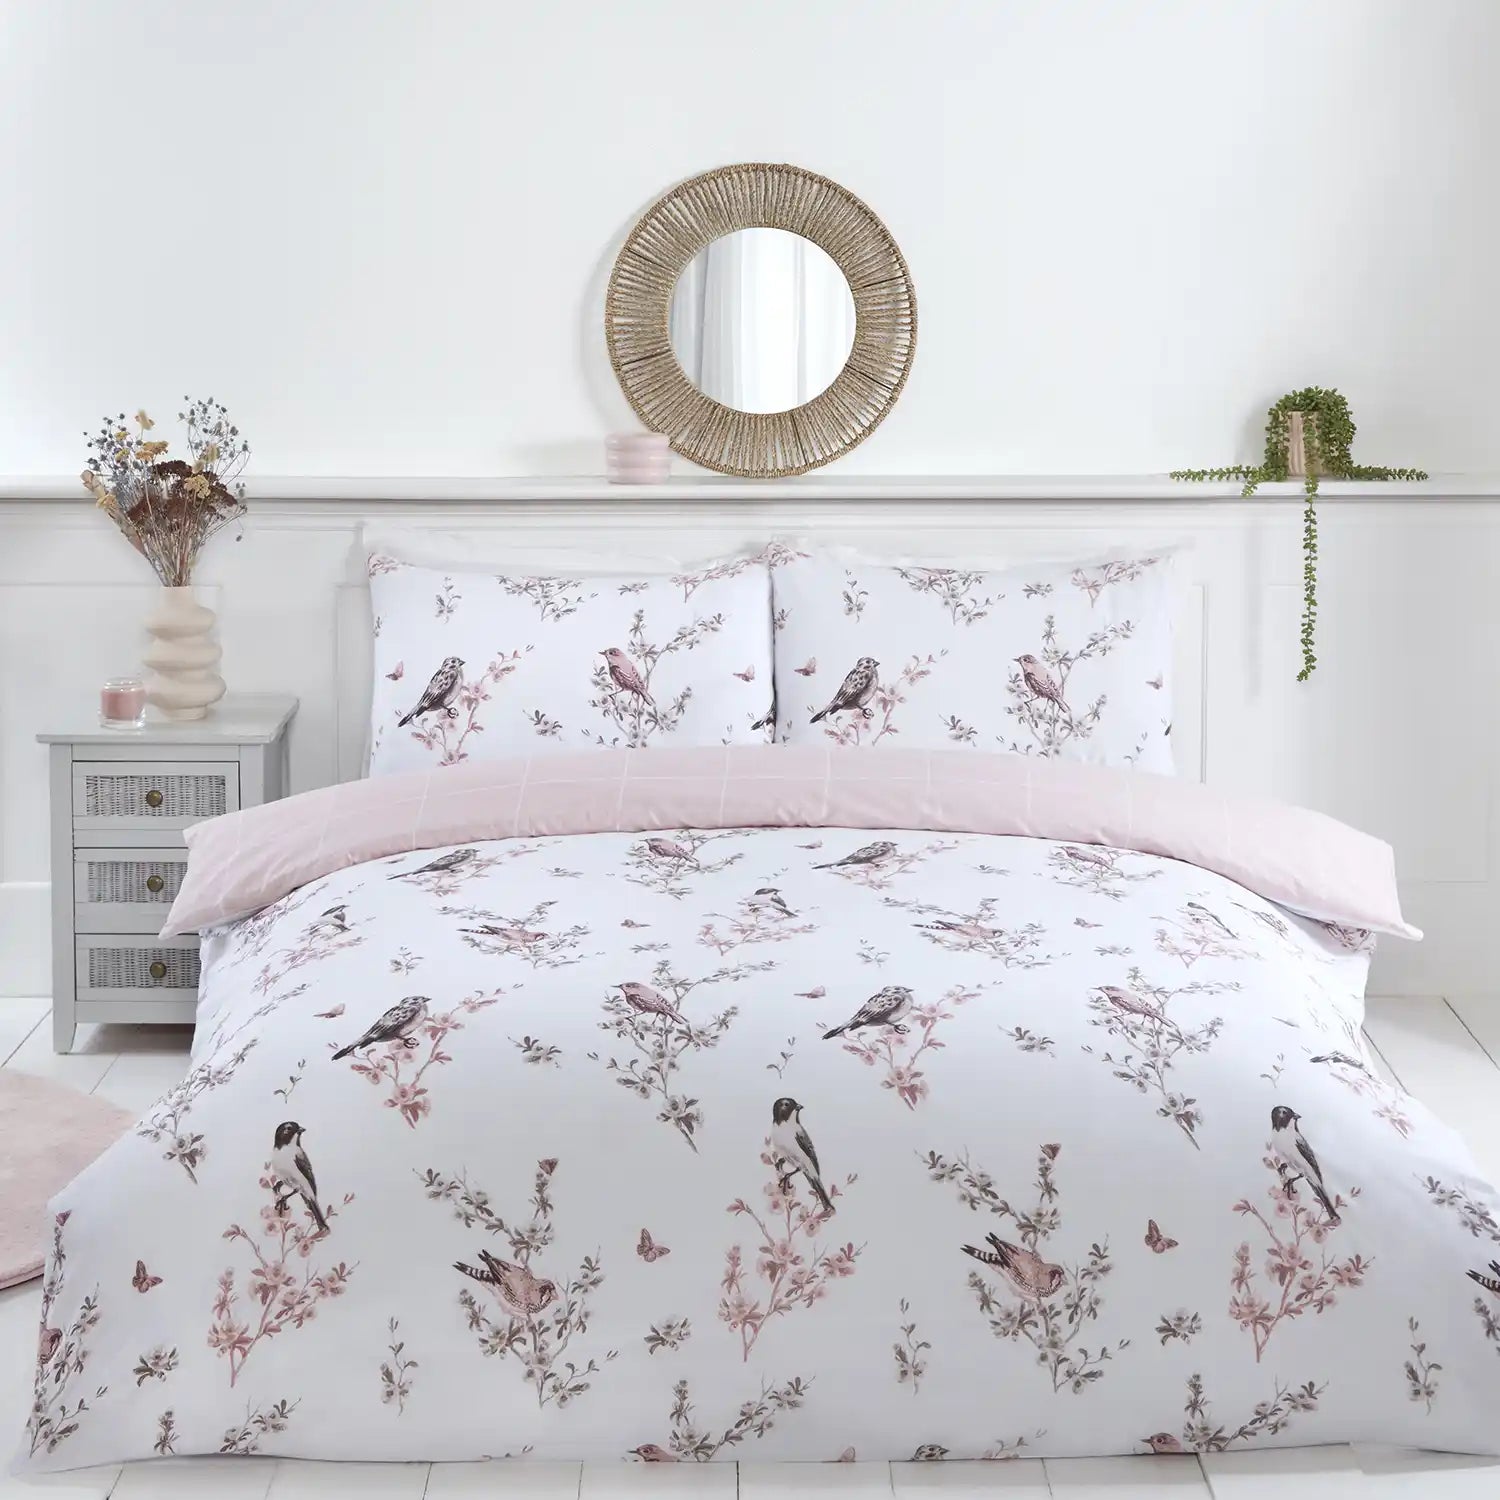  The Home Collection Vintage Toile Duvet Cover Set 2 Shaws Department Stores